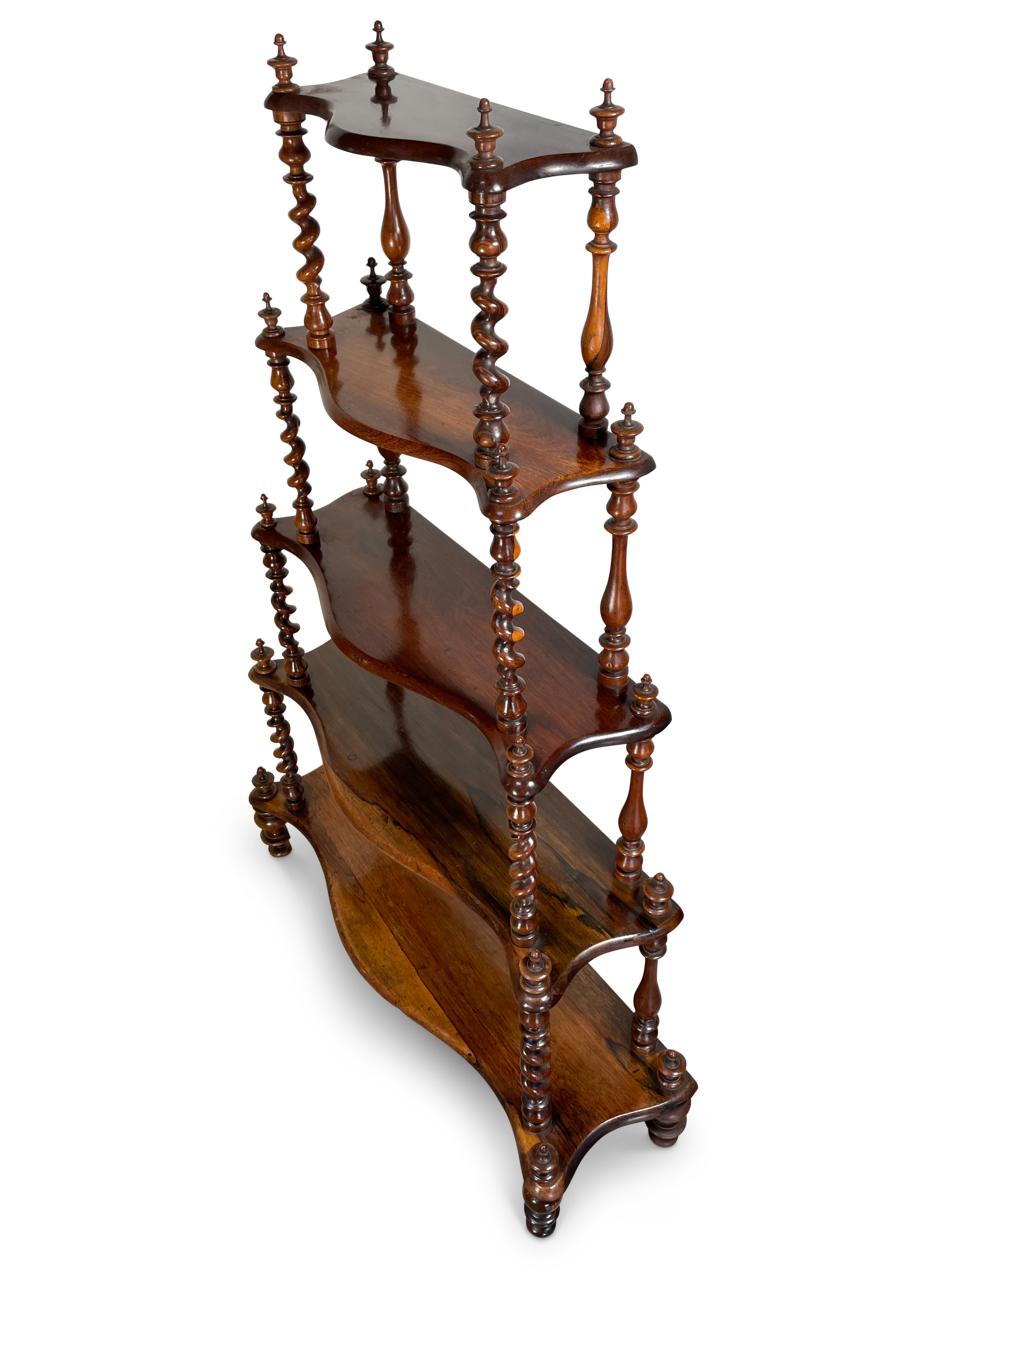 Walnut and Rosewood Five Tiered Wotnot Etagere